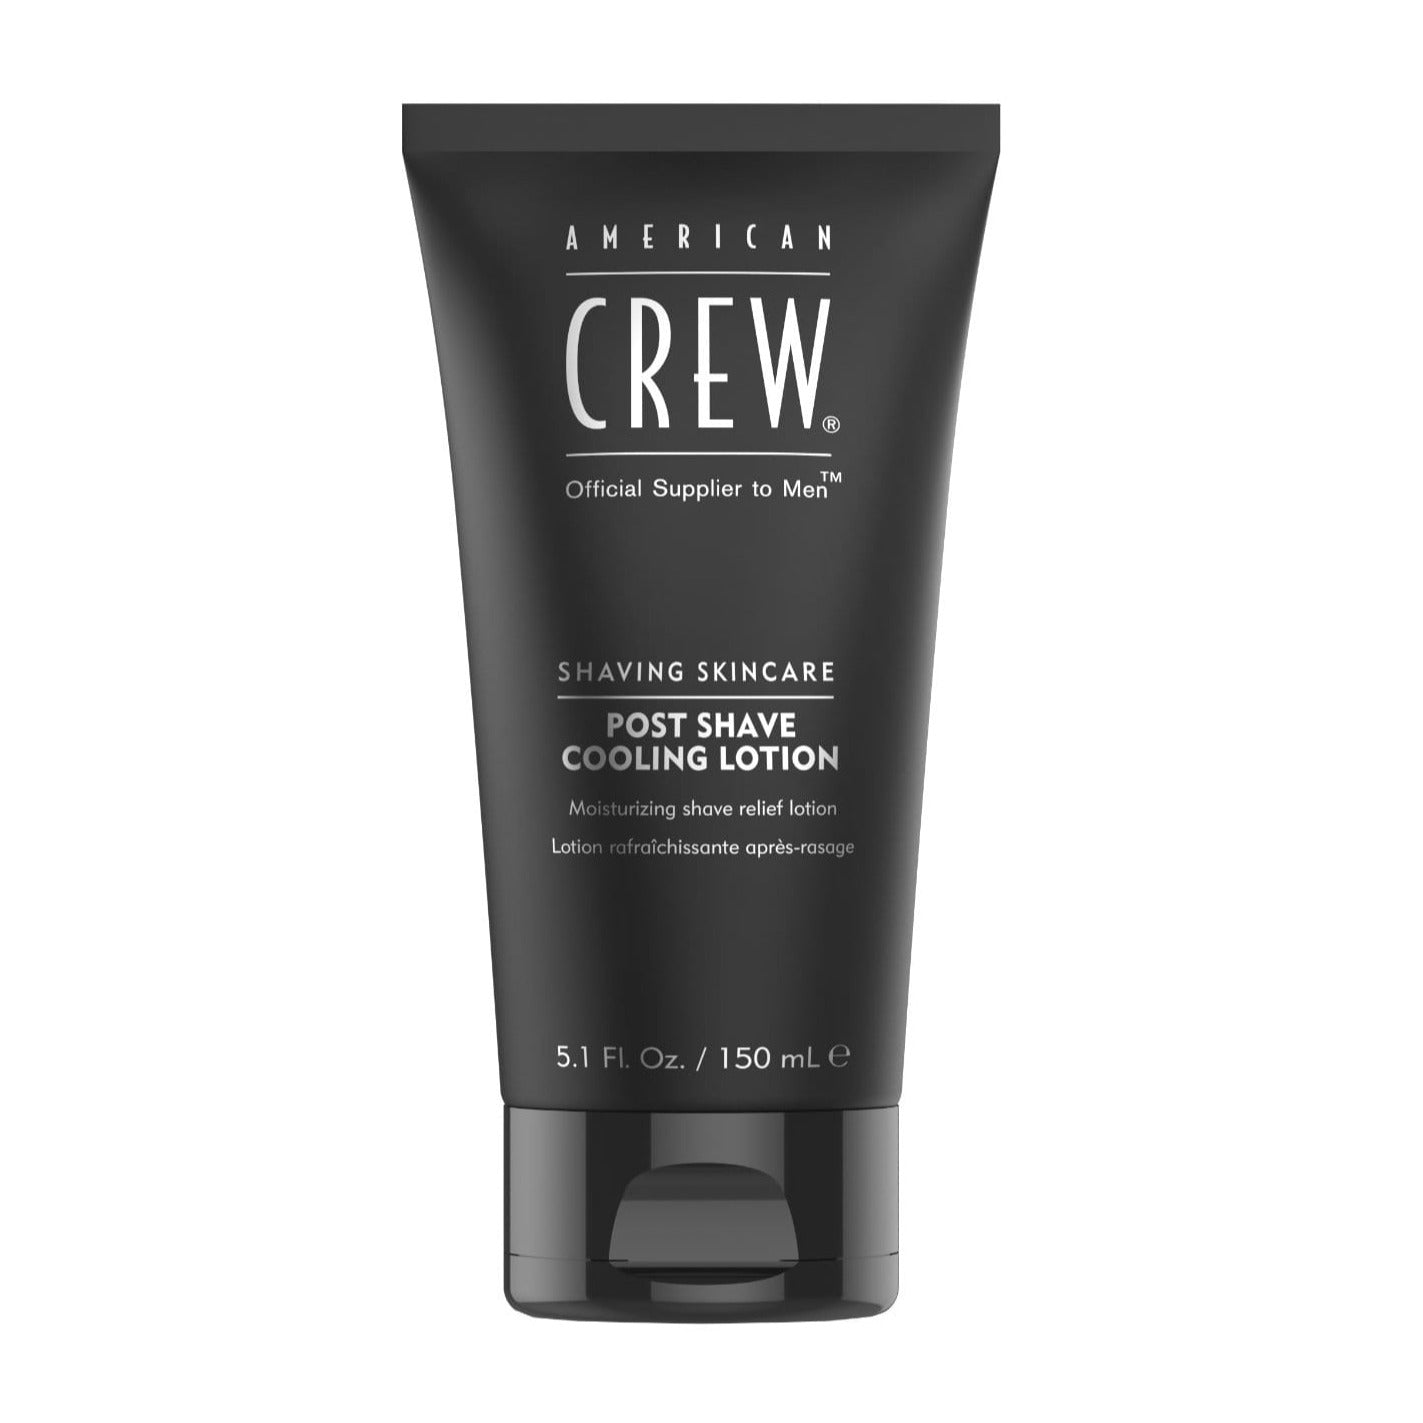 American Crew Post Shave Cooling Lotion - Sagema